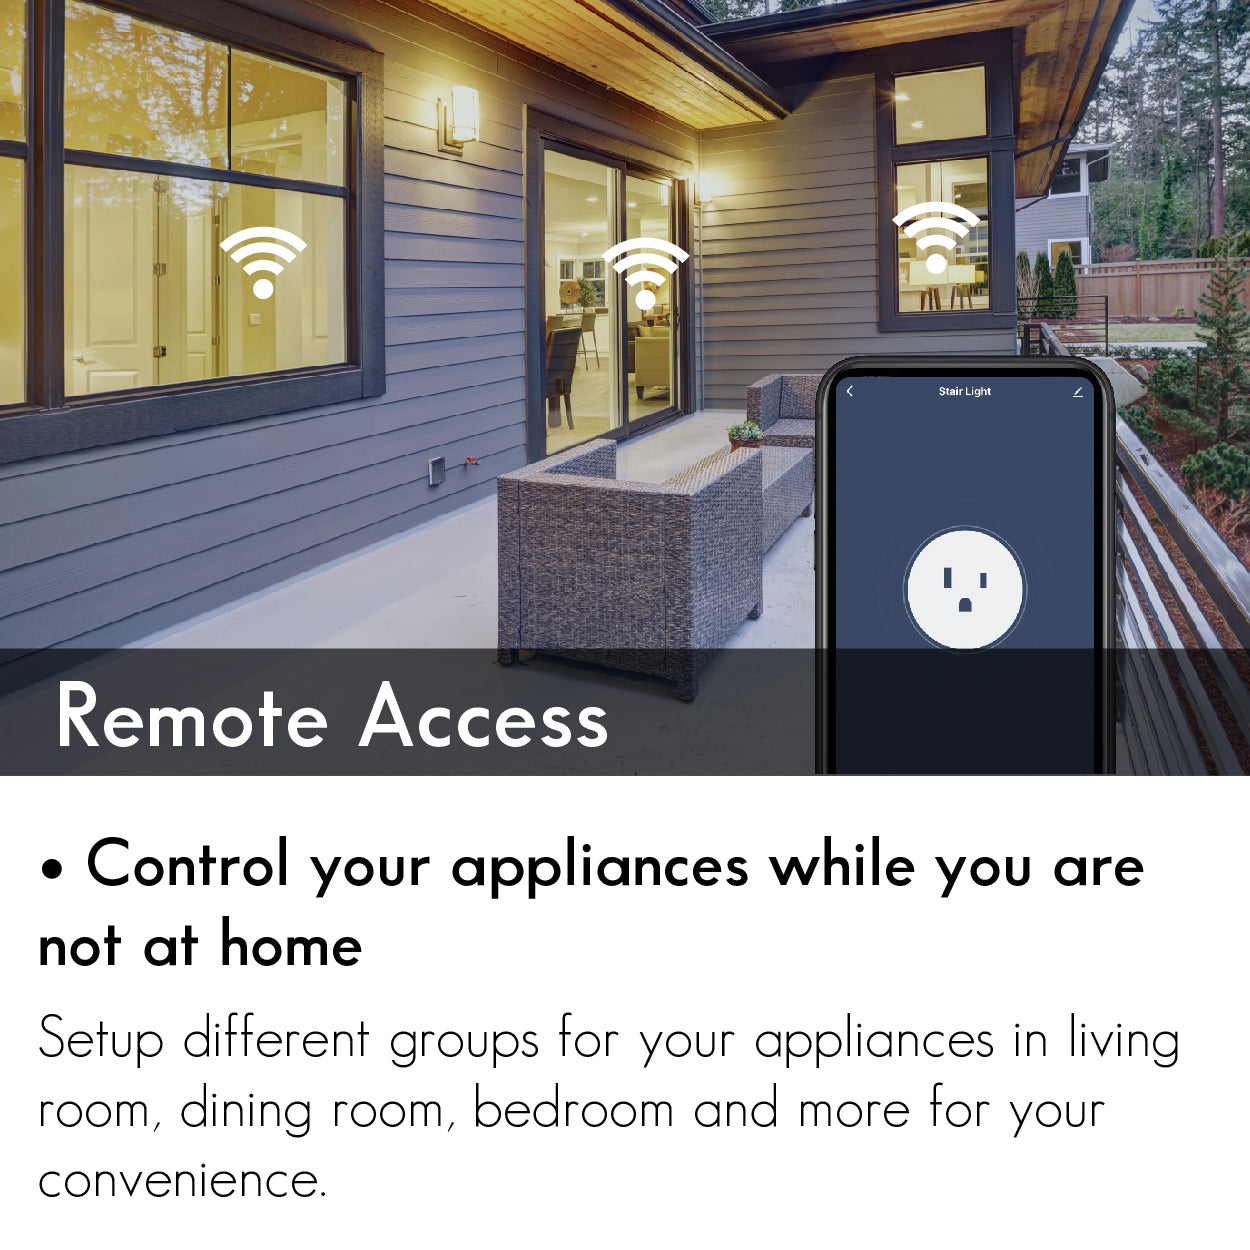 allows homeowners to control appliances, thermostats, lights, and other devices remotely